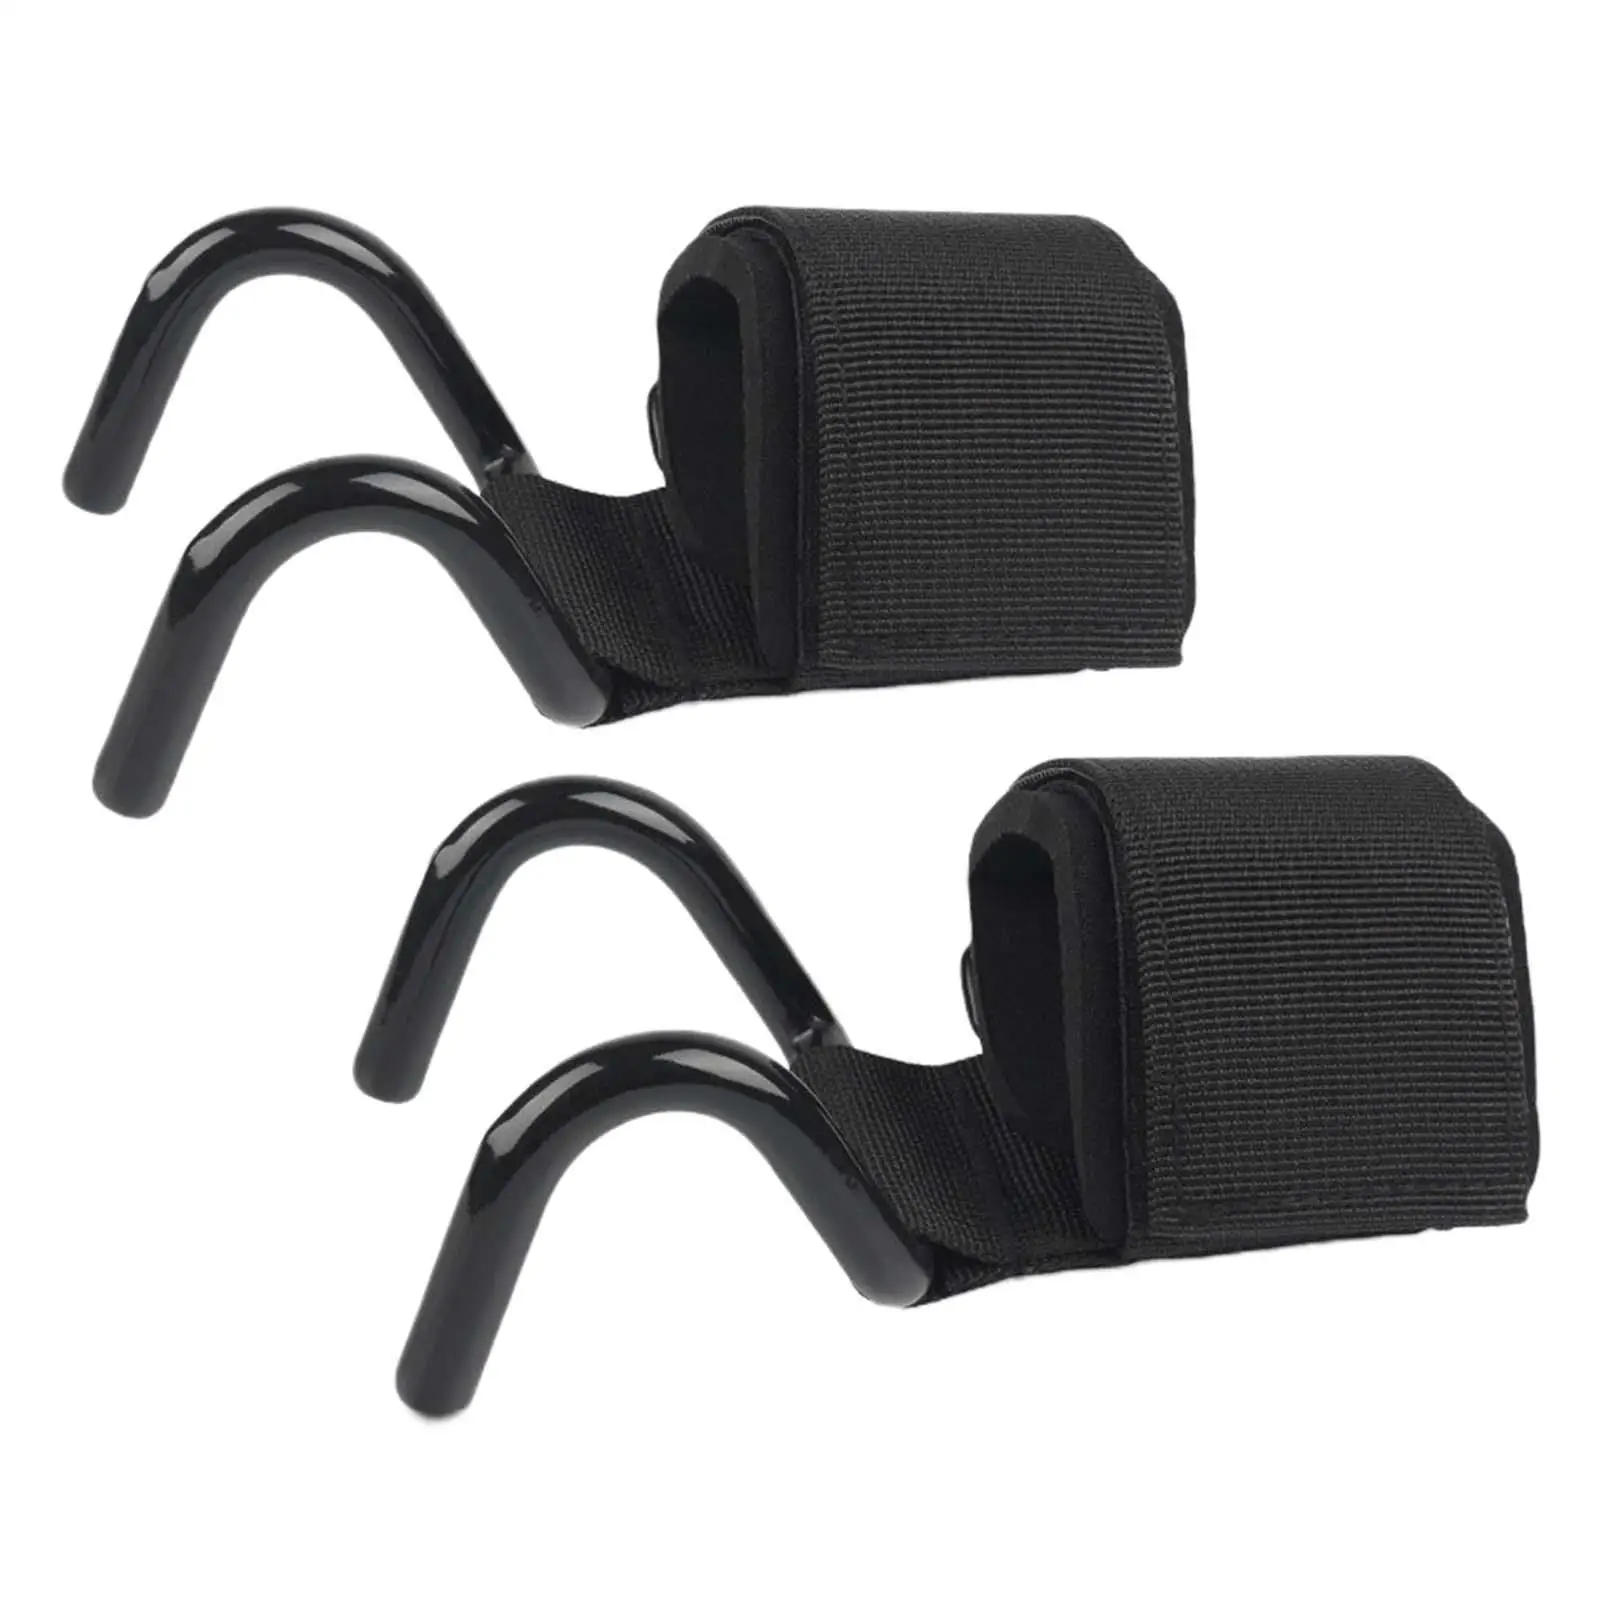 Weight Lifting Hooks Pull up Support Heavy Duty Palm Protection Hand Grips for Weightlifting Training Sports Exercise Men